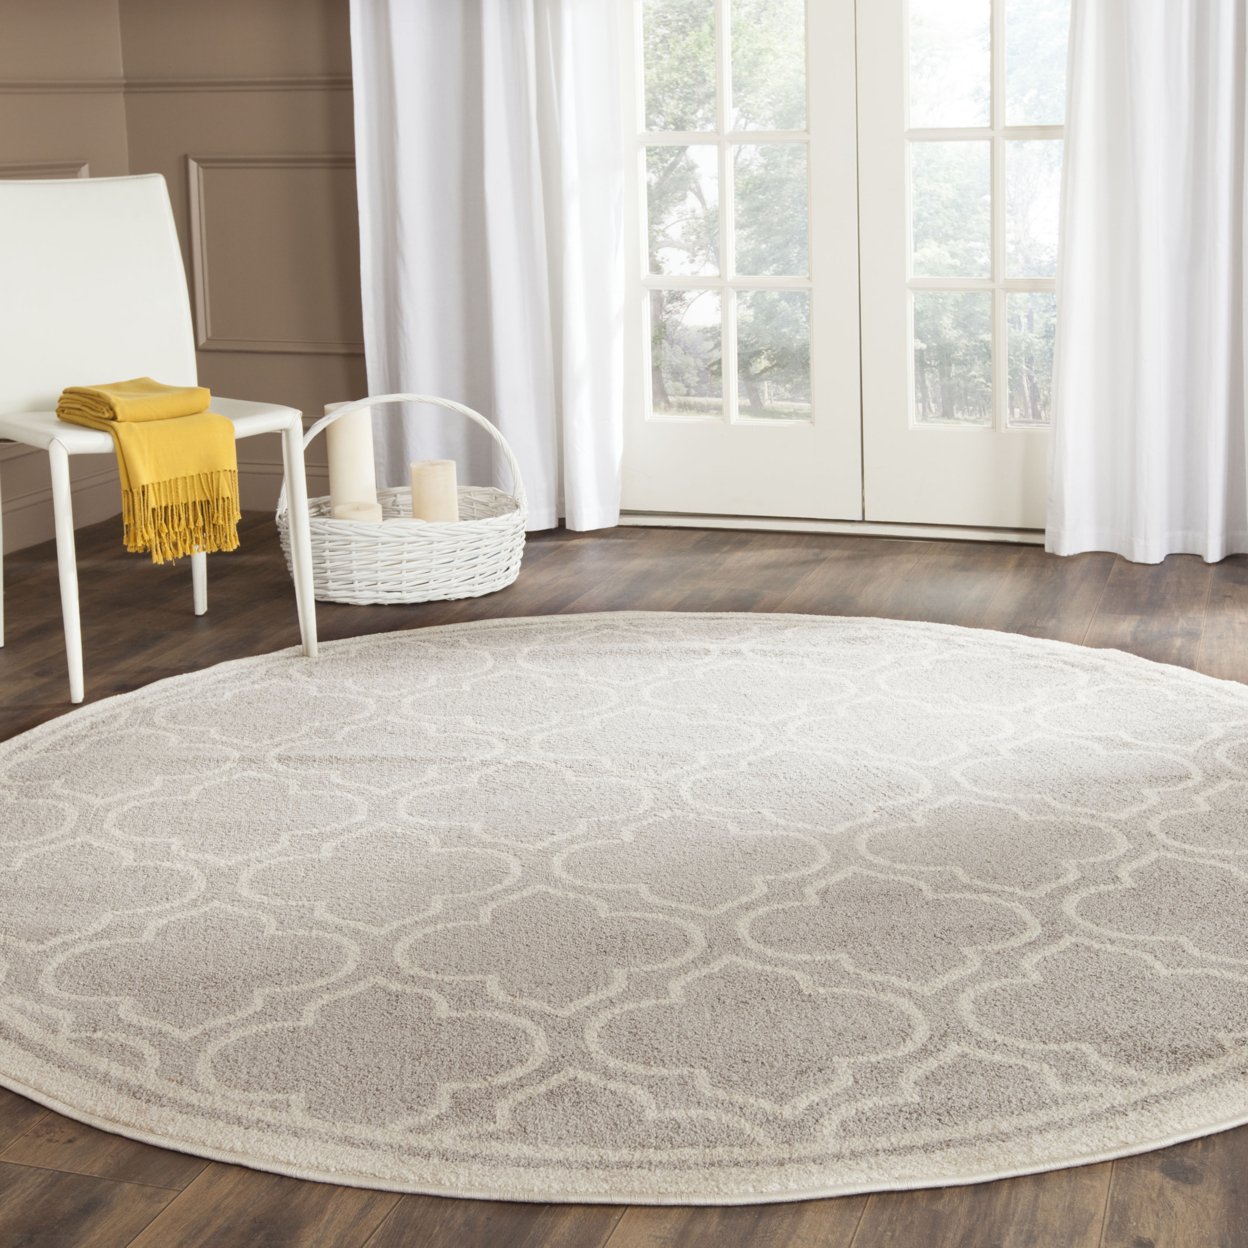 SAFAVIEH Amherst Collection AMT412B Light Grey/Ivory Rug - 5' Square